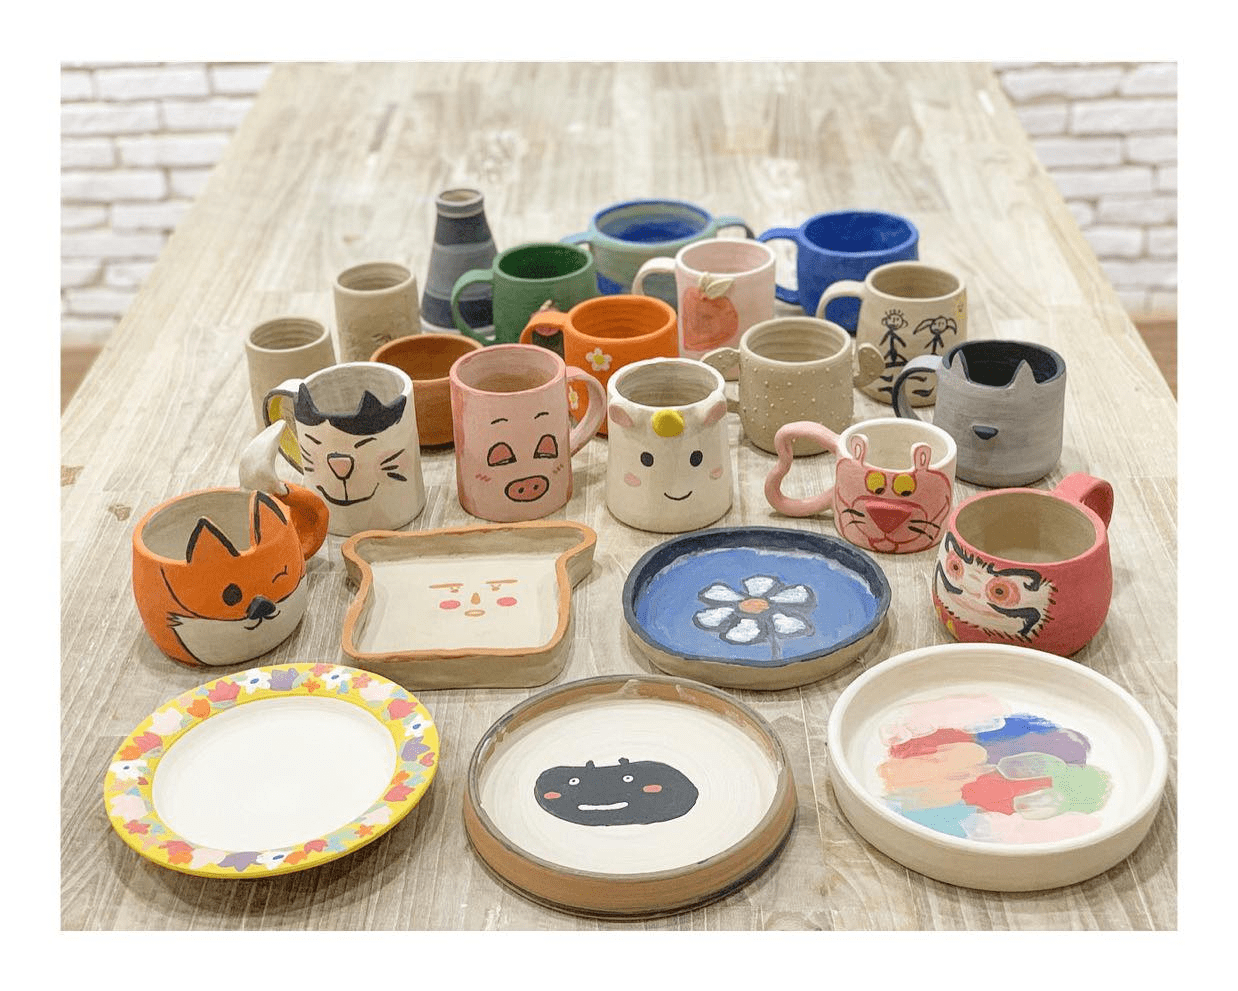 Meow Pottery Workshop